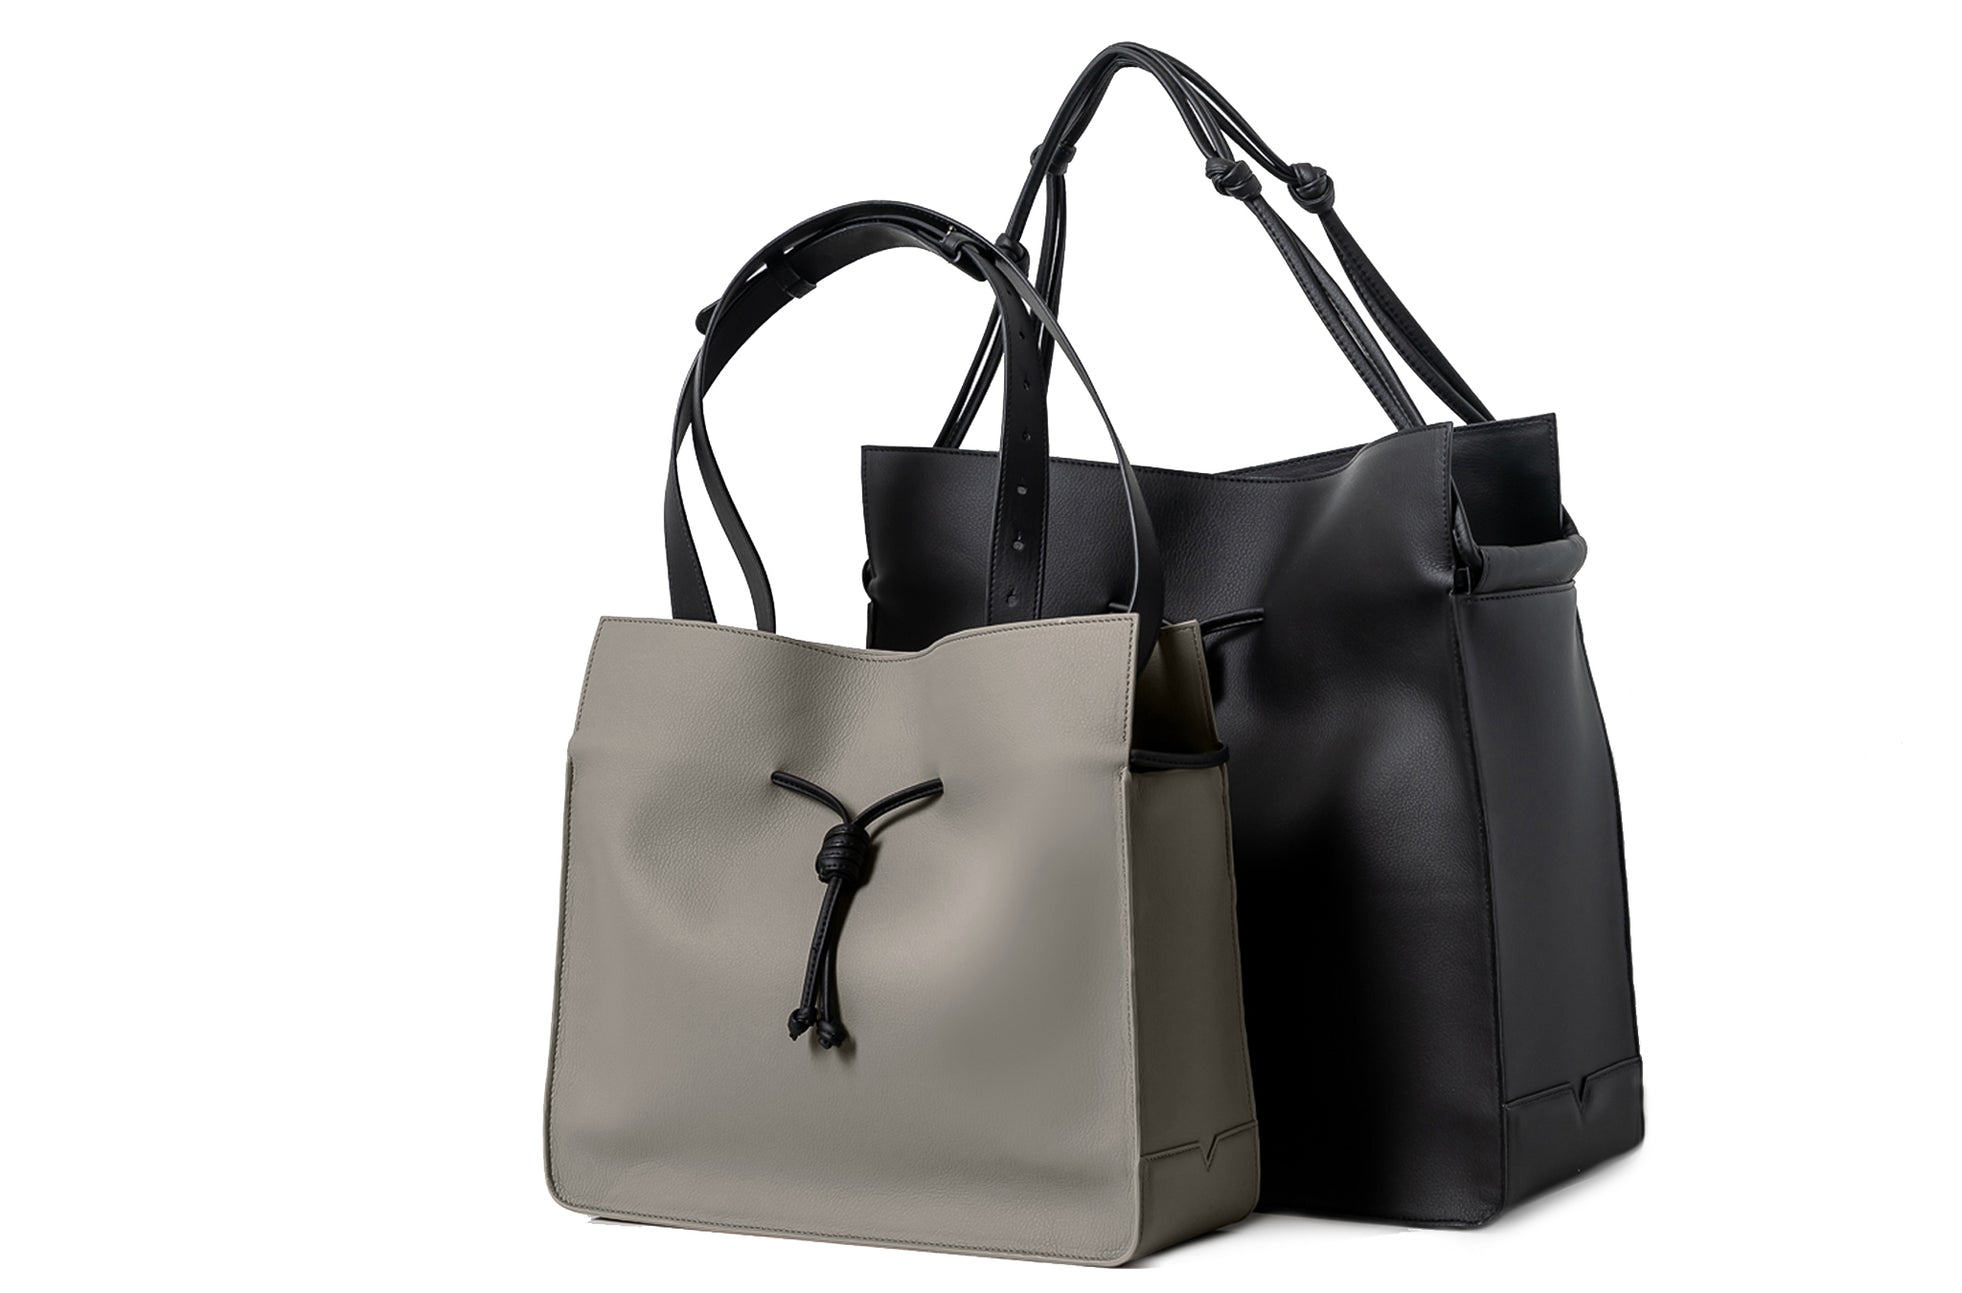 The Medium Shopper in Technik-Leather in Stone and Black image 5